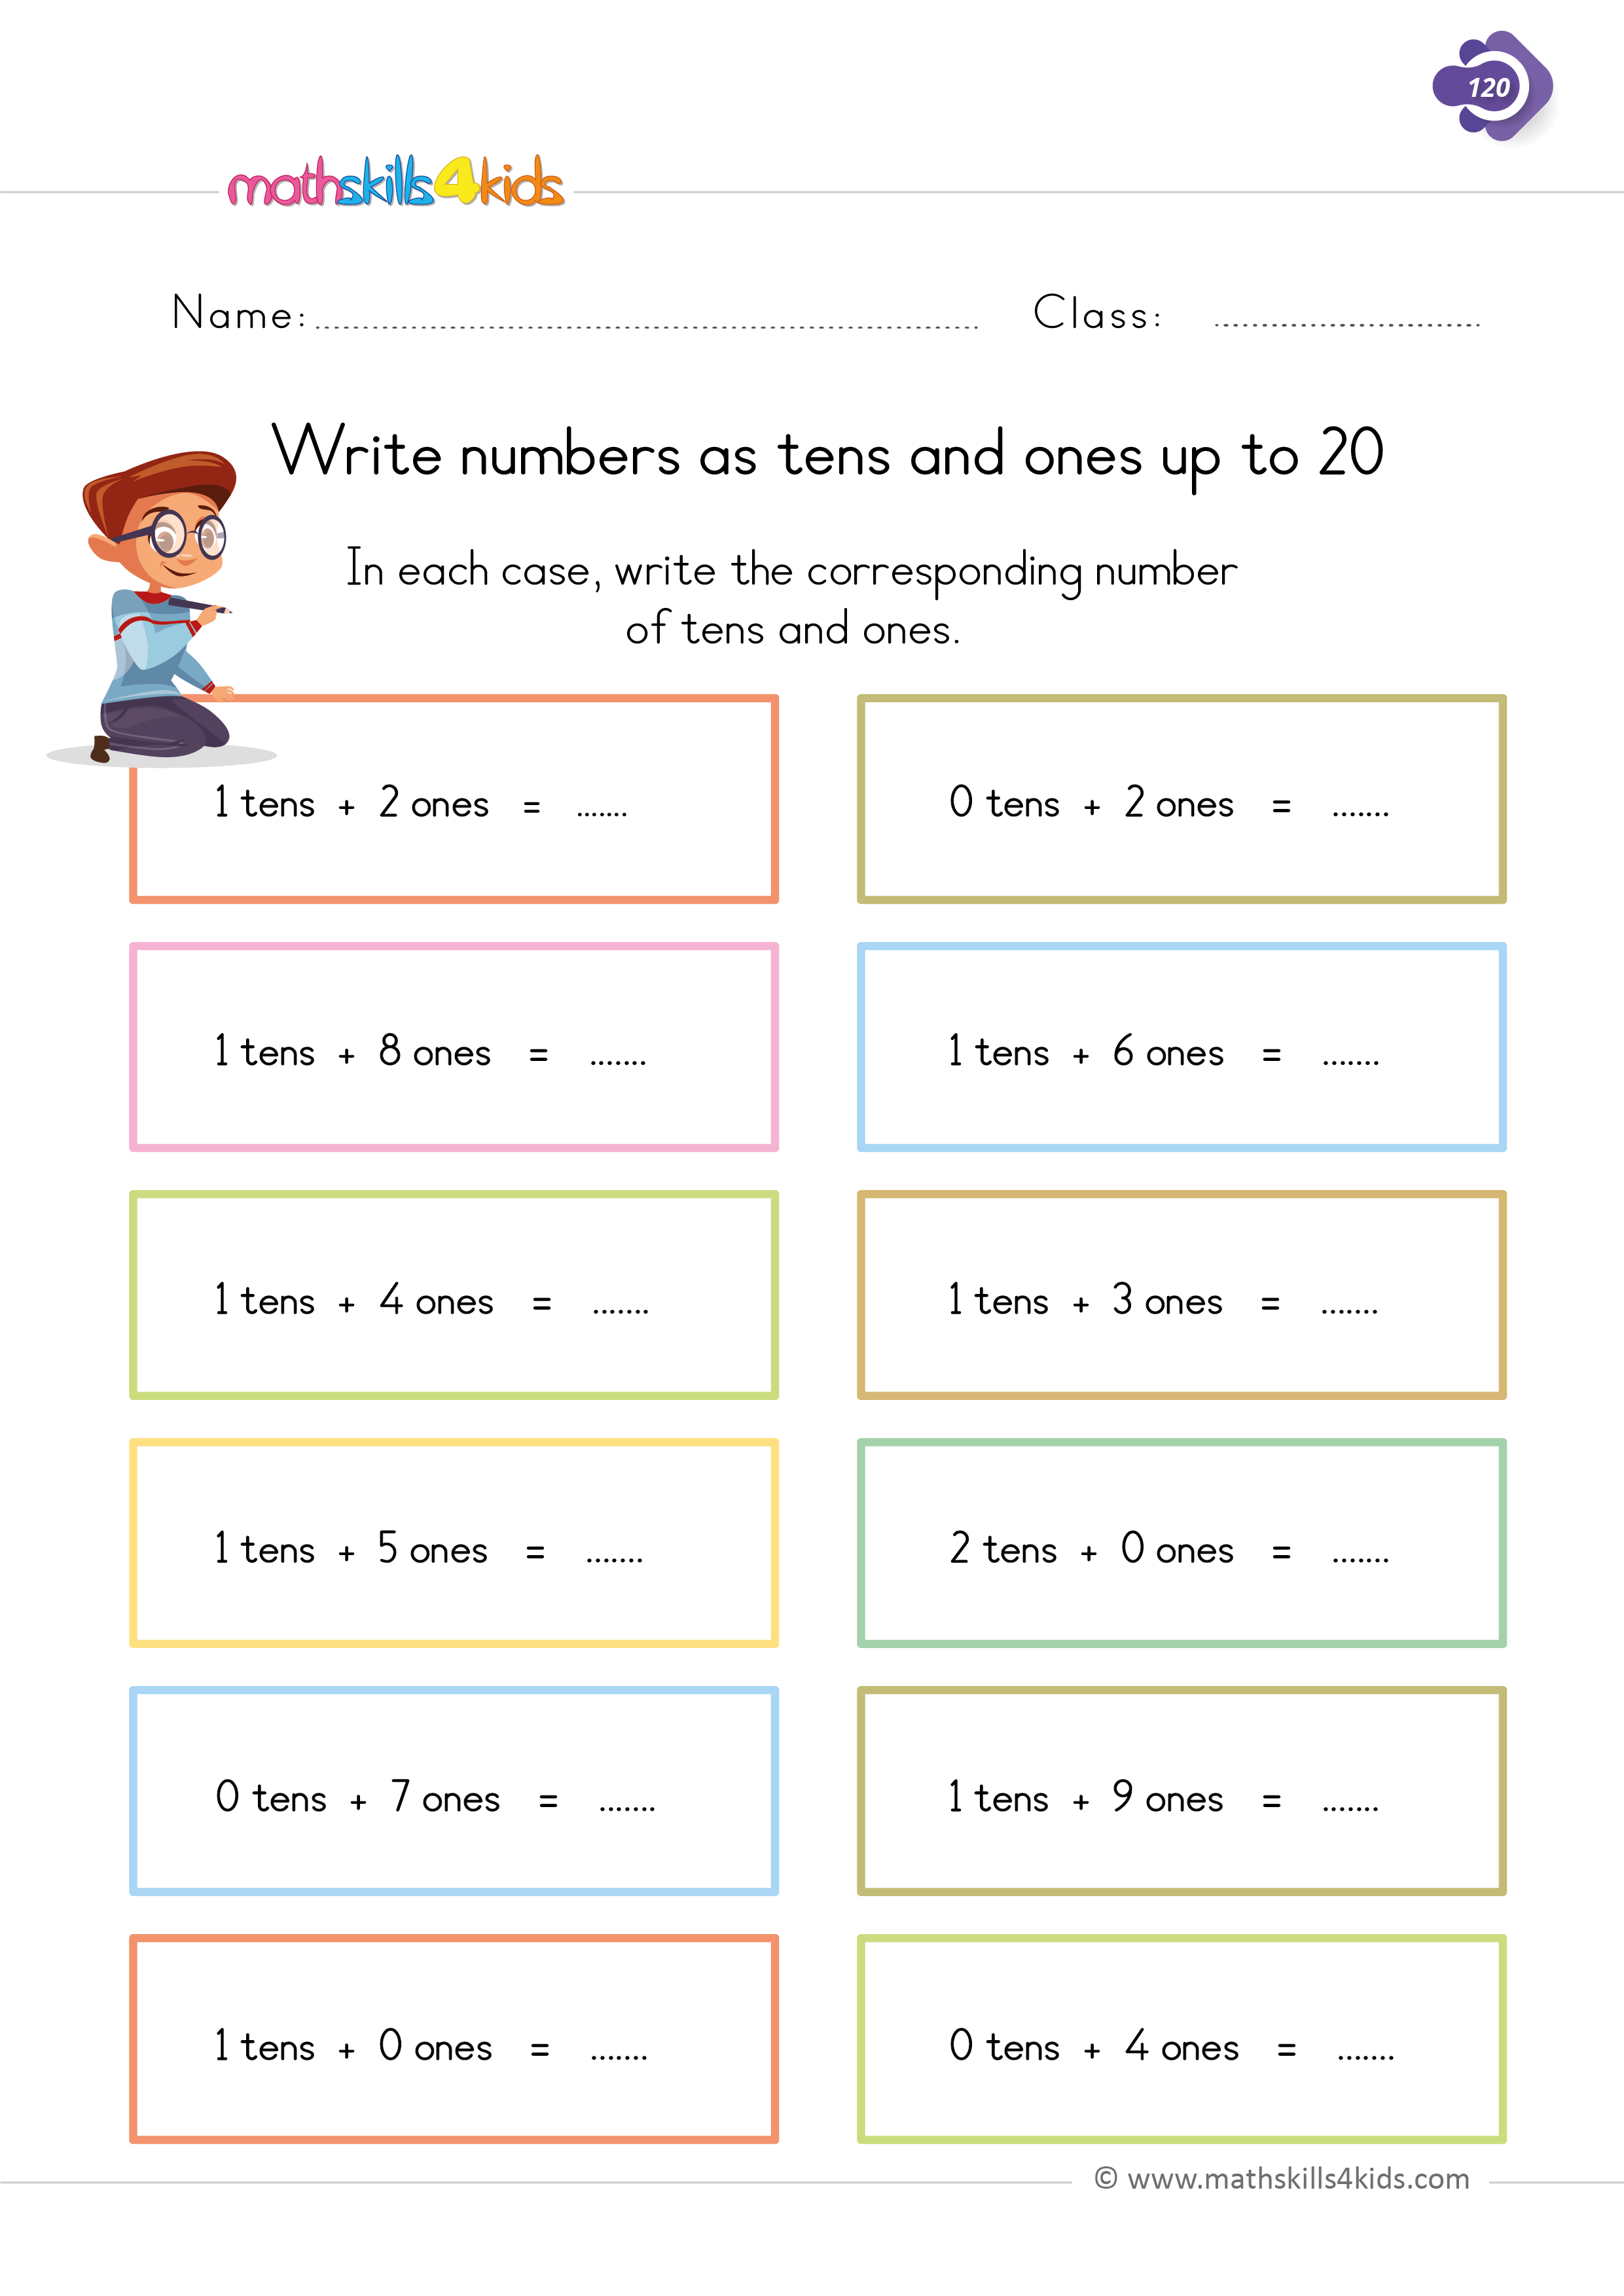 First Grade math worksheets - Writing numbers as tens and ones up to 20